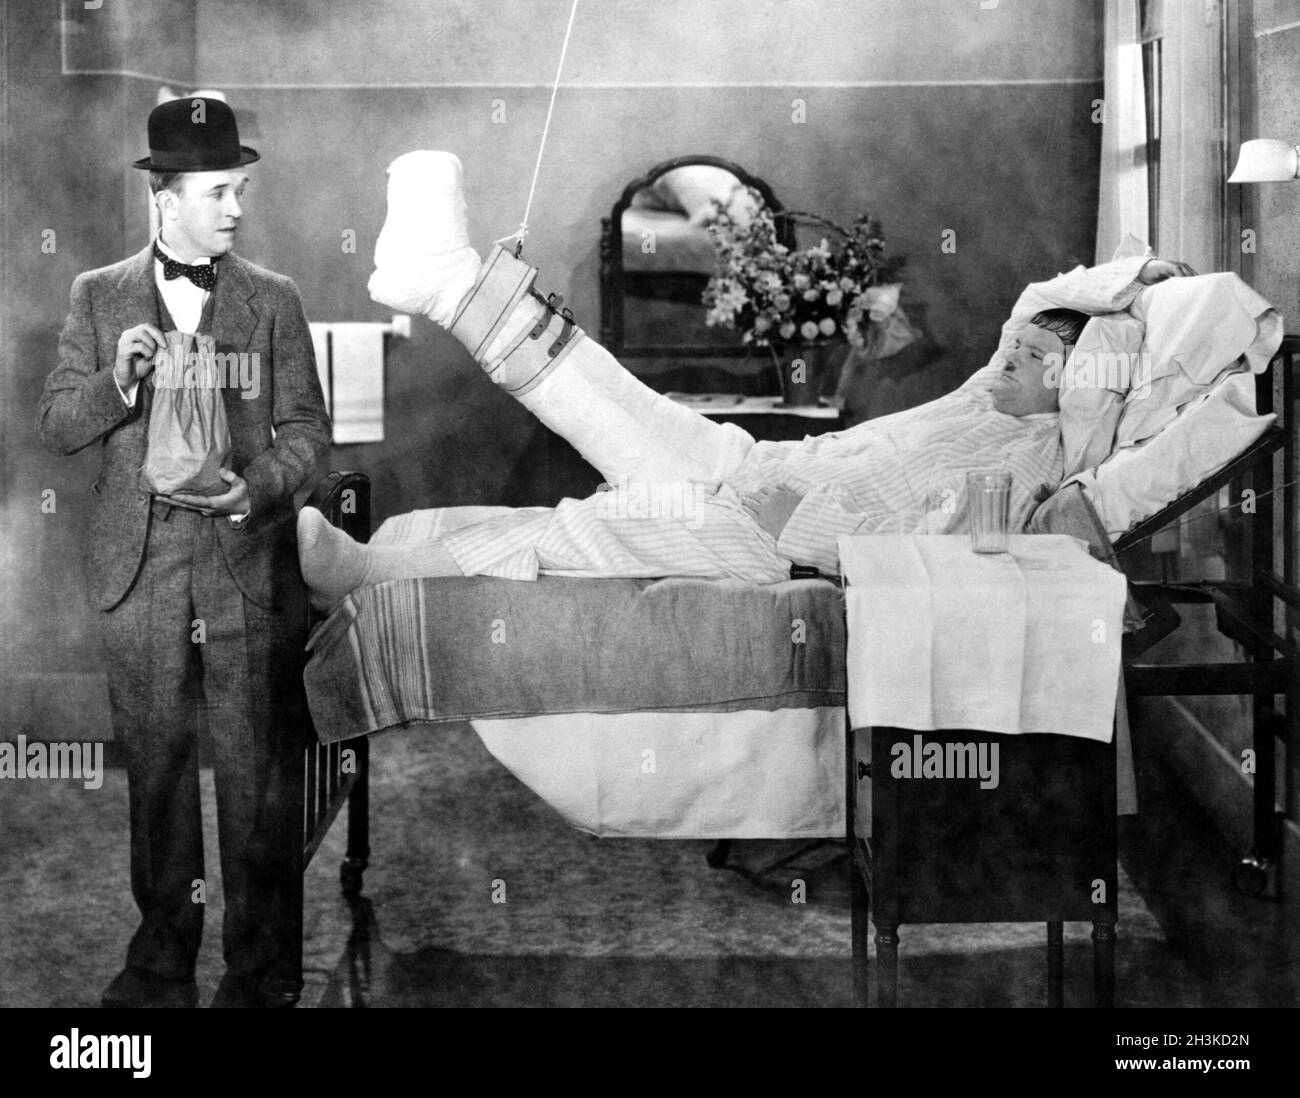 OLIVER HARDY and STAN LAUREL in COUNTY HOSPITAL (1932), directed by JAMES PARROTT. Credit: HAL ROACH / Album Stock Photo